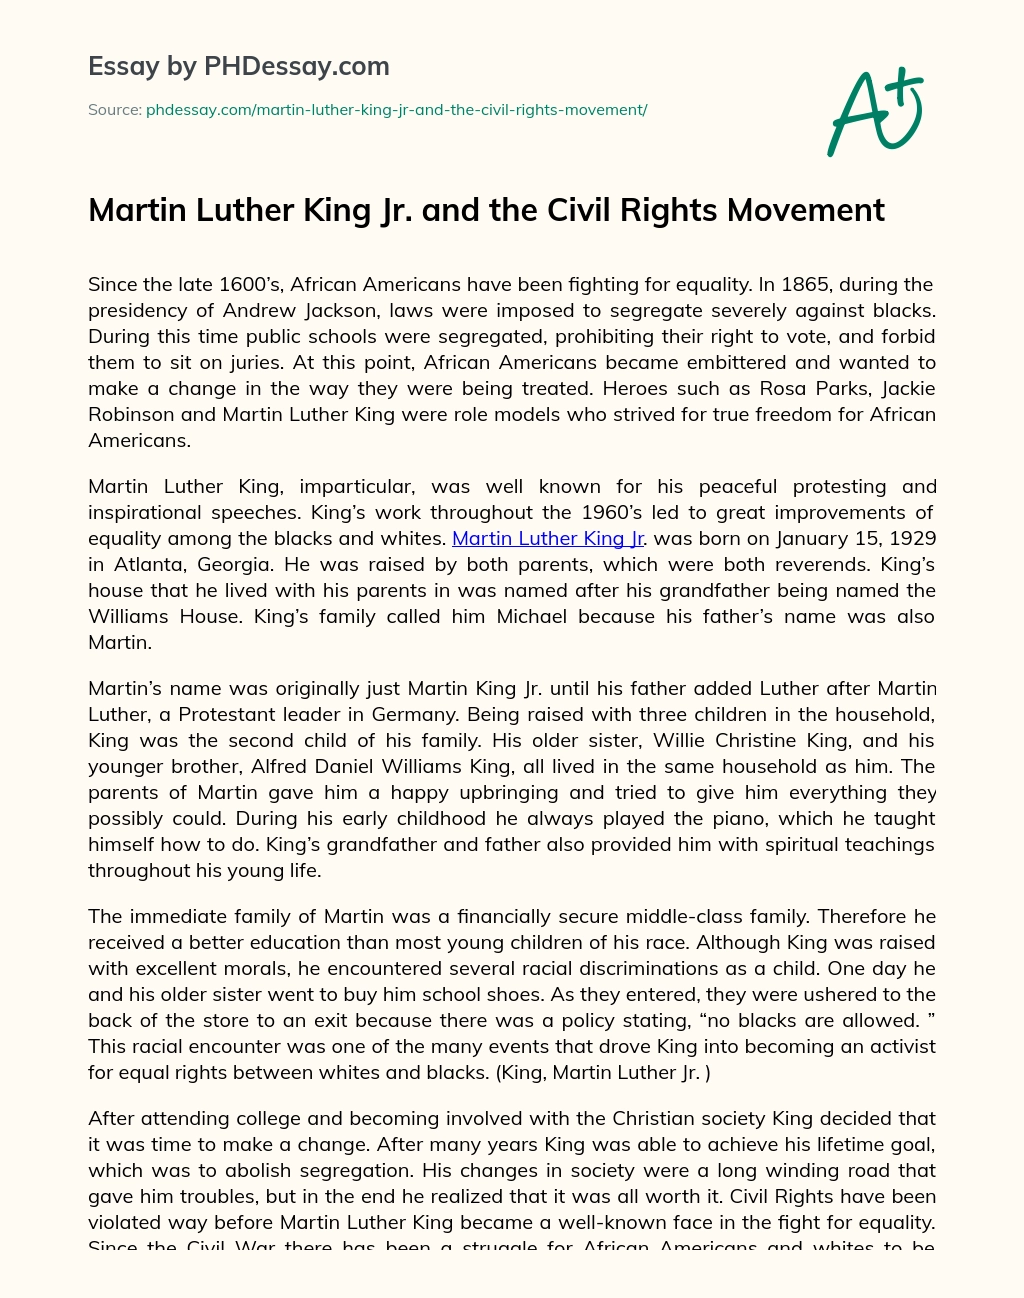 Martin Luther King Jr. and the Civil Rights Movement essay